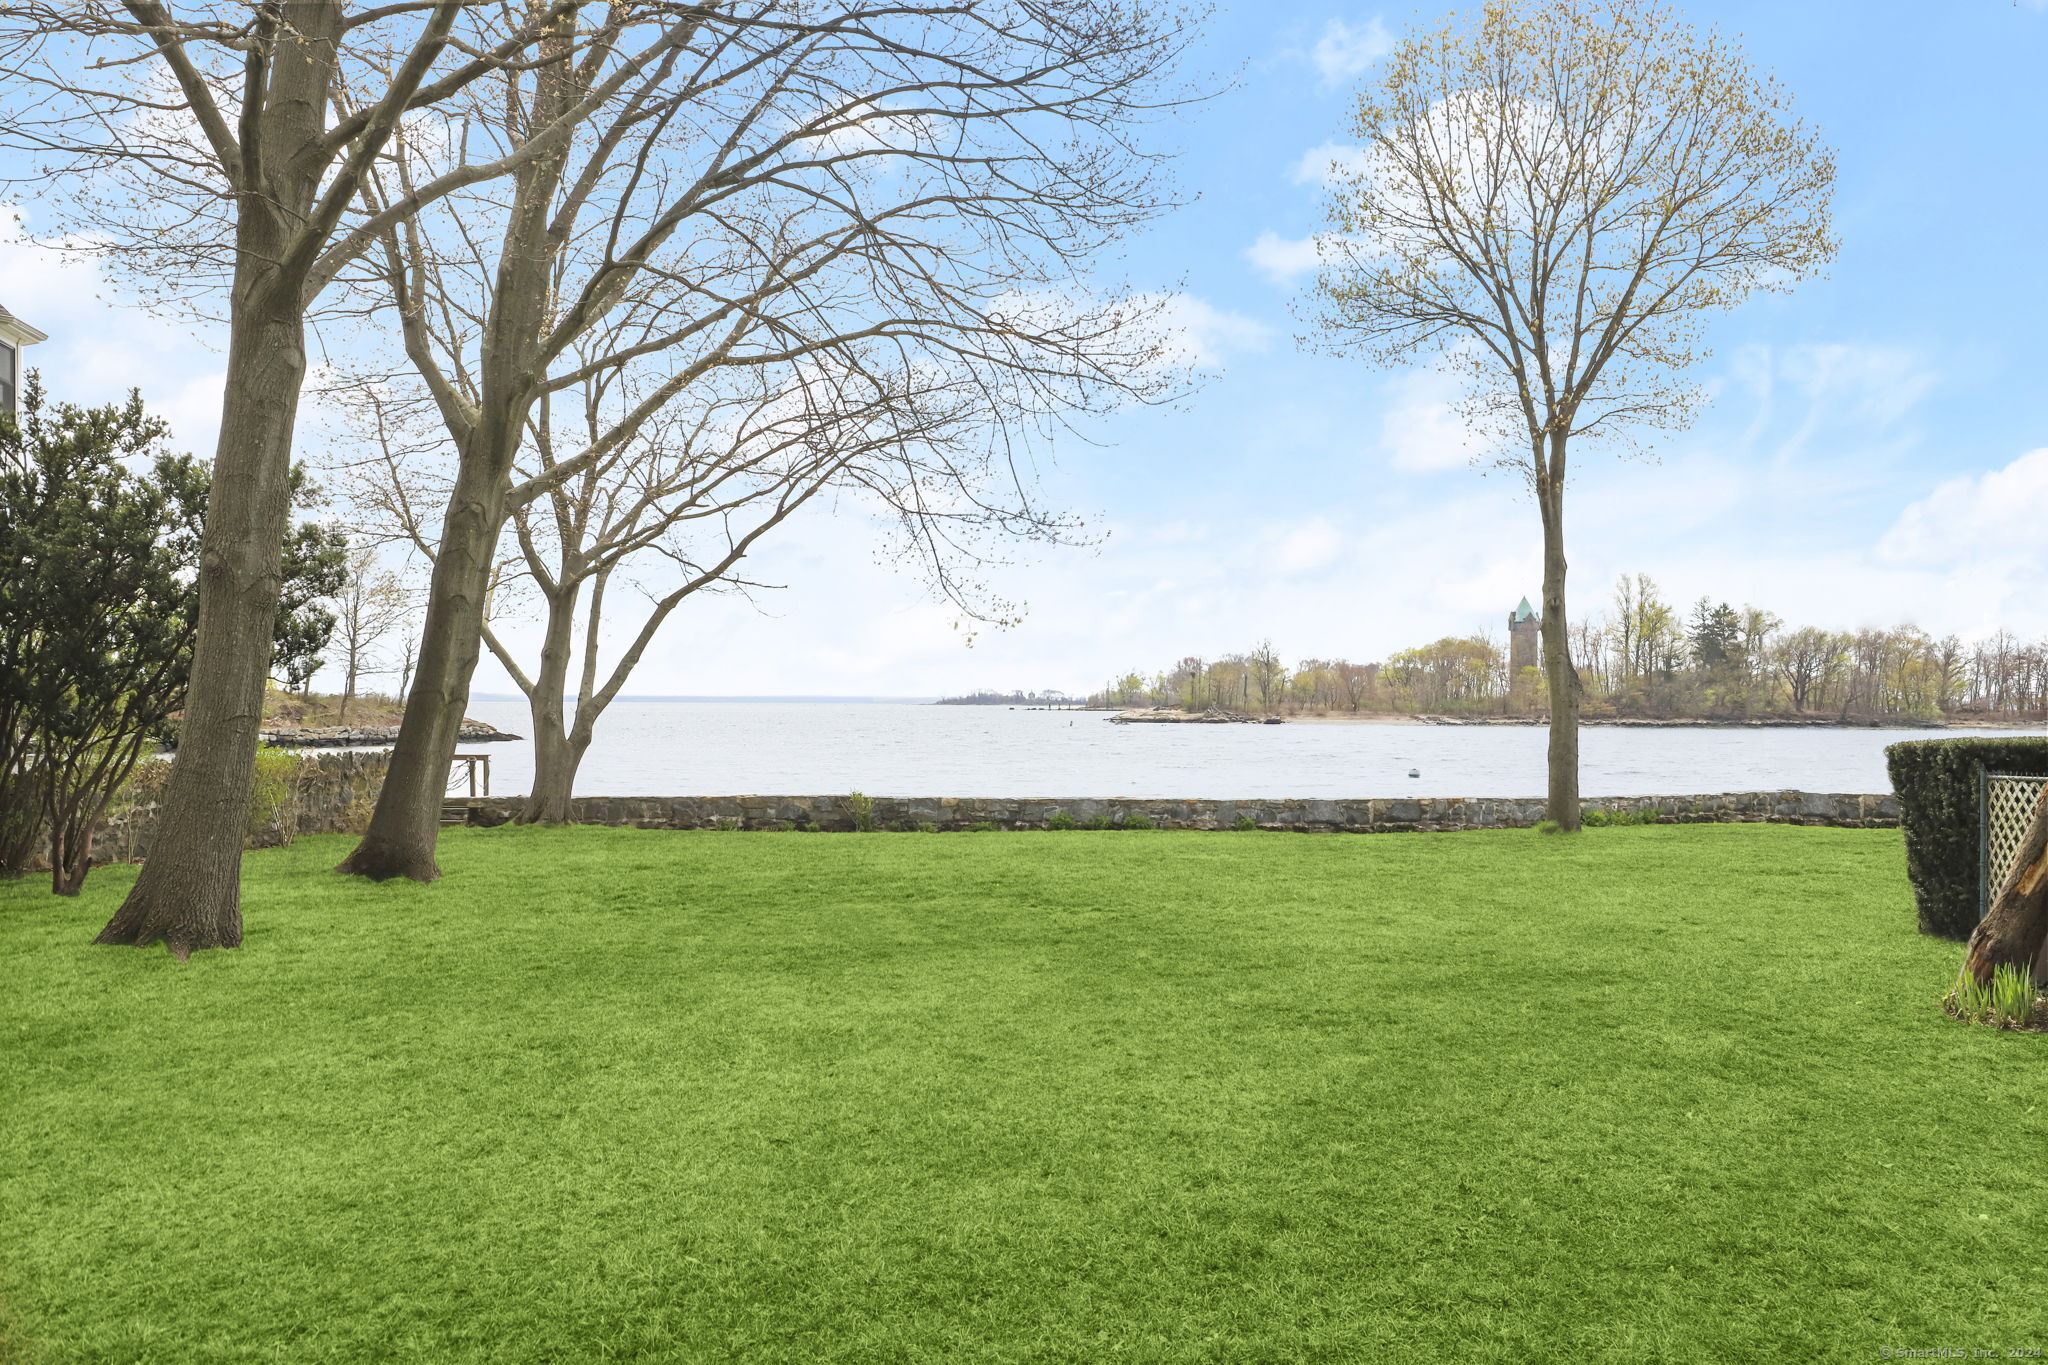 Experience tranquil waterfront living in Greenwich with sprawling vistas of Long Island Sound right outside your door. Offered for the first time on market in over 100 years, this expansive lot spanning 0.3826 acres, combined with the adjacent lot 0.3483 presents an ideal canvas for your dream waterfront home, offering up to 10, 028 sq/ft of FAR. Enjoy breathtaking views from your backyard. Conveniently located near Byram Park, residents can access the public pool, beach, marina, and boat launch. With close proximity to downtown Greenwich and Manhattan, this property seamlessly combines serenity with accessibility. Please note, this listing is combined with 33 Byram Shore Rd, as both lots are for sale together.